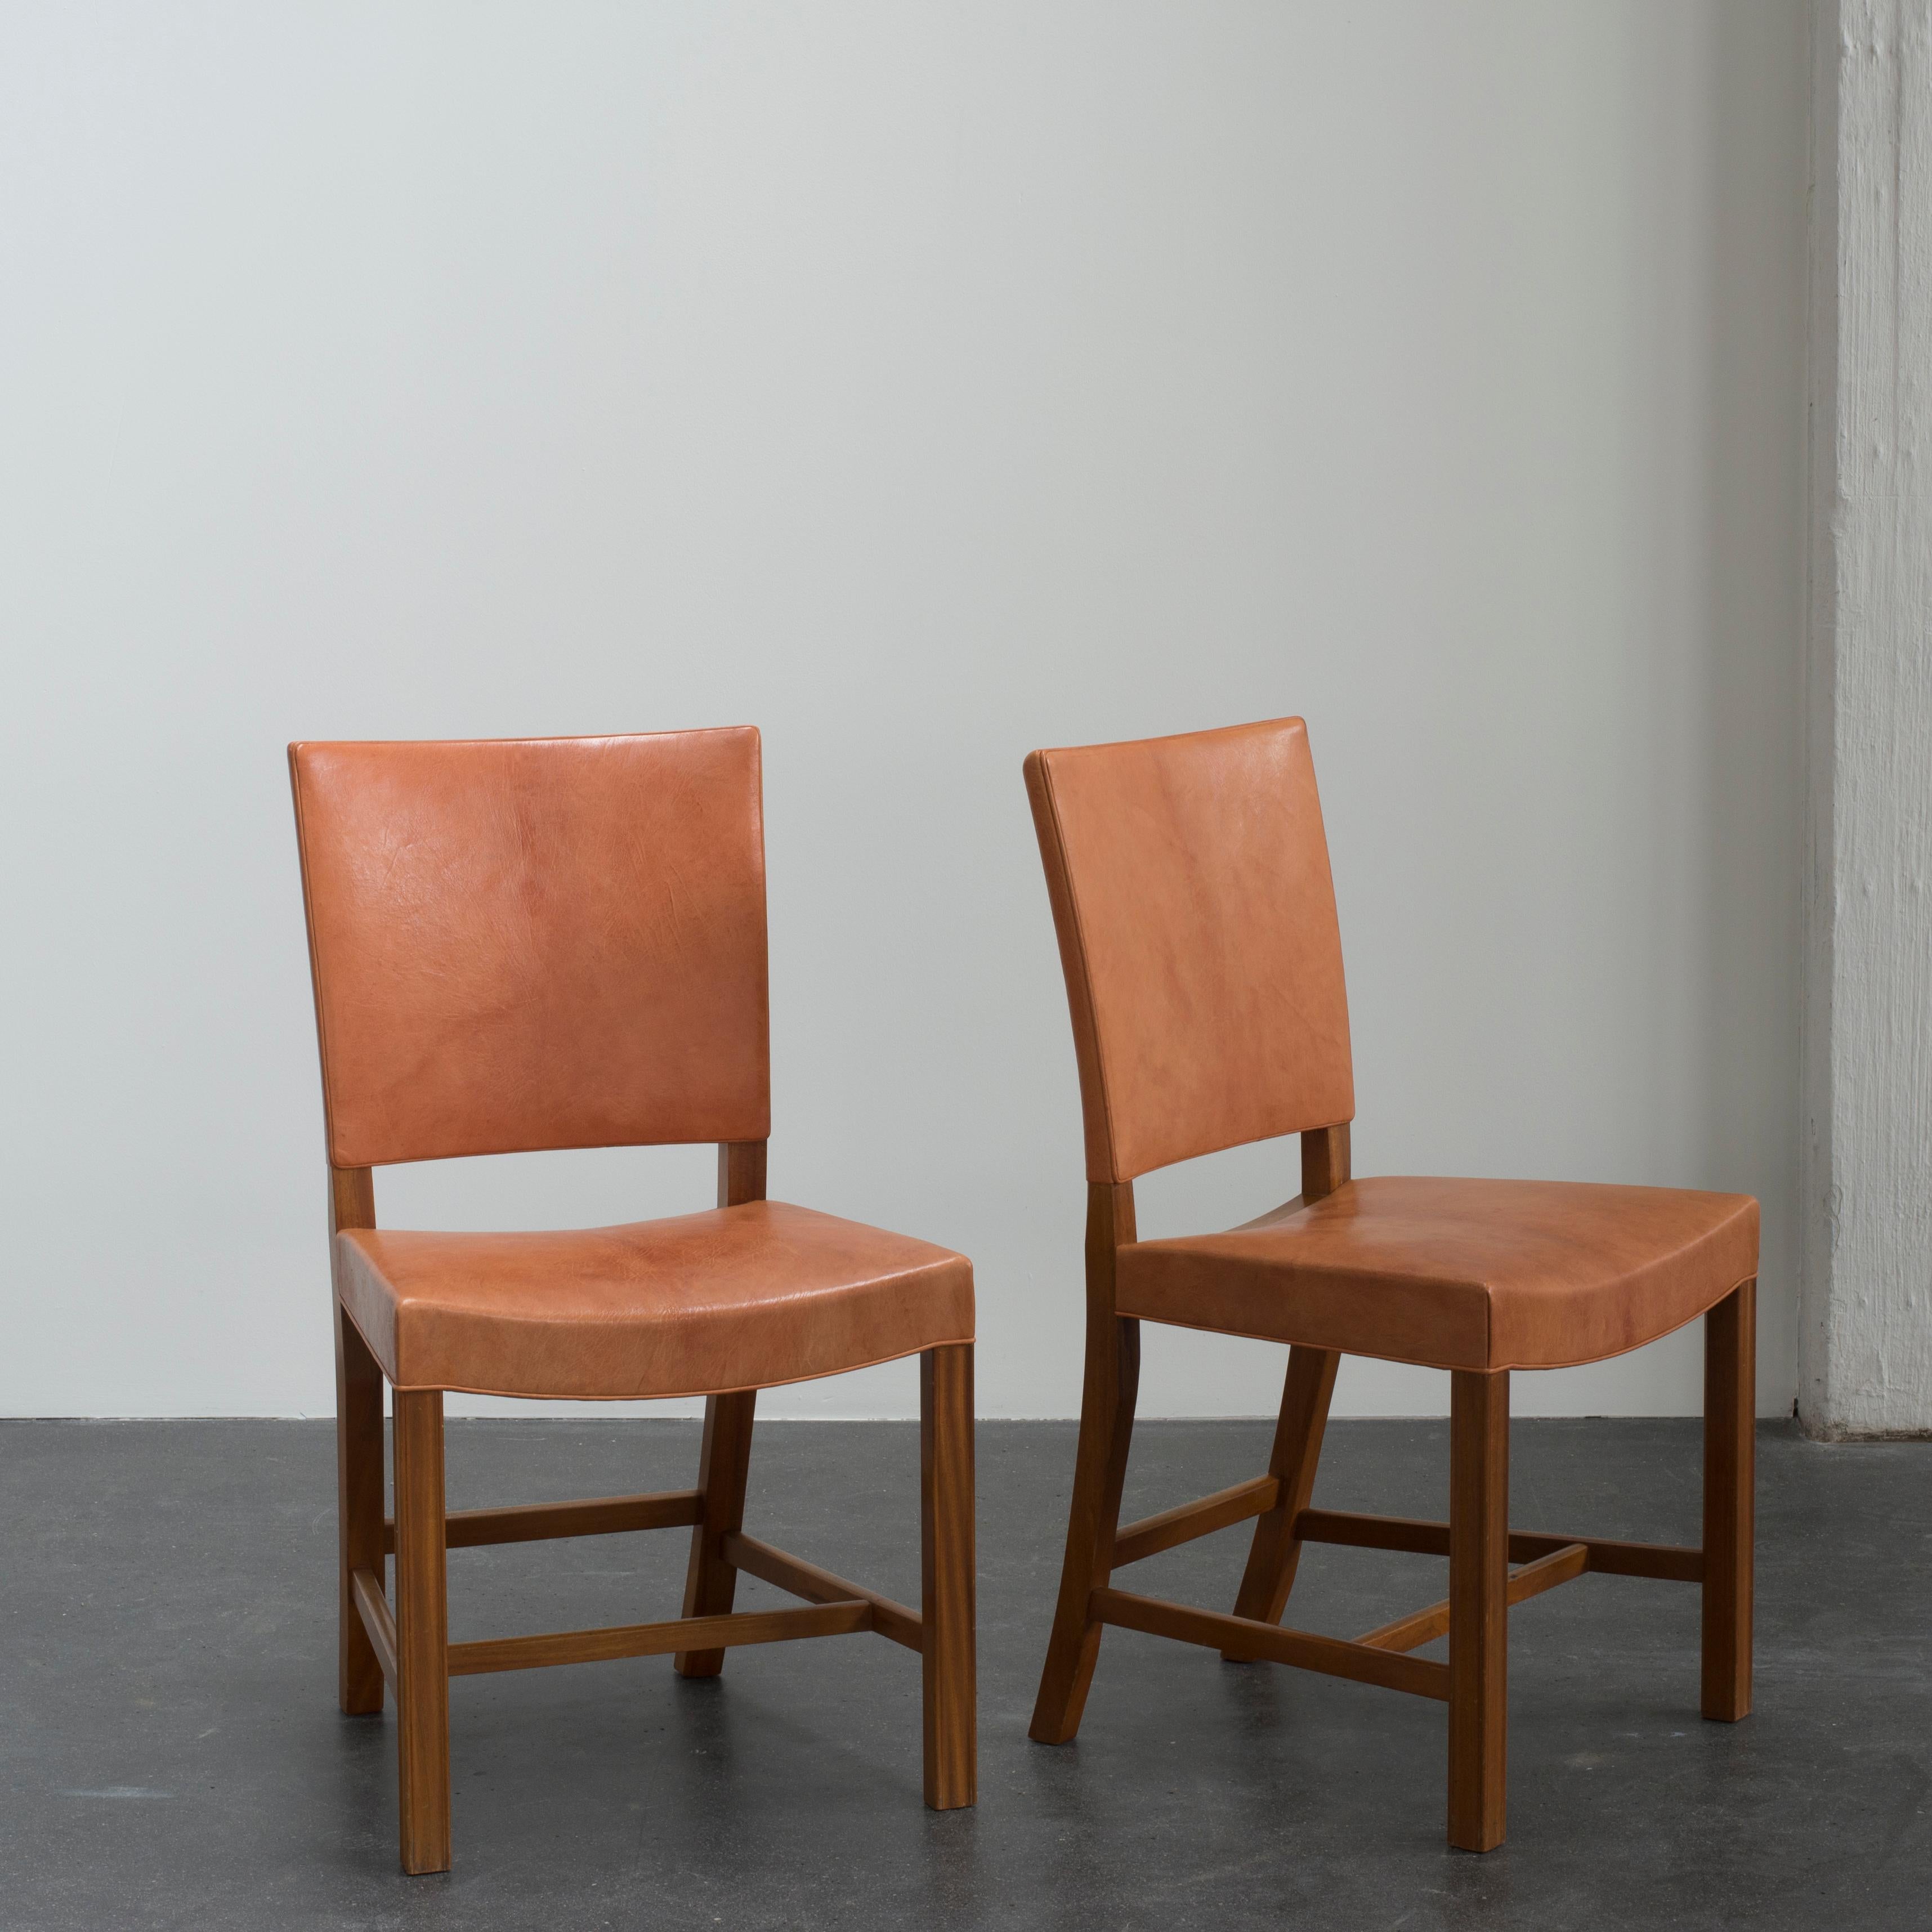 Kaare Klint Set of Four Red Chairs for Rud. Rasmussen 1